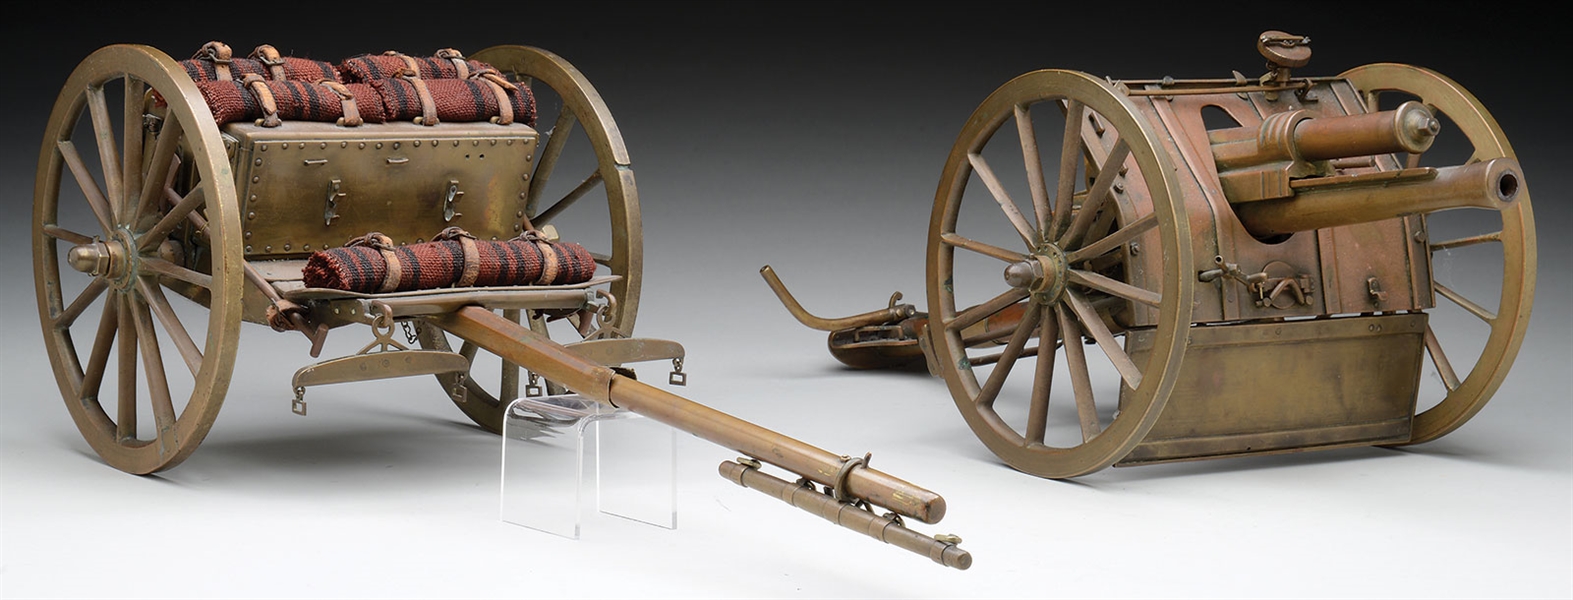 1/8 SCALE ALL BRASS WORKING MODEL OF THE BRITISH WWI 18-POUNDER RECOILLESS CANNON AND CAISSON.                                                                                                          